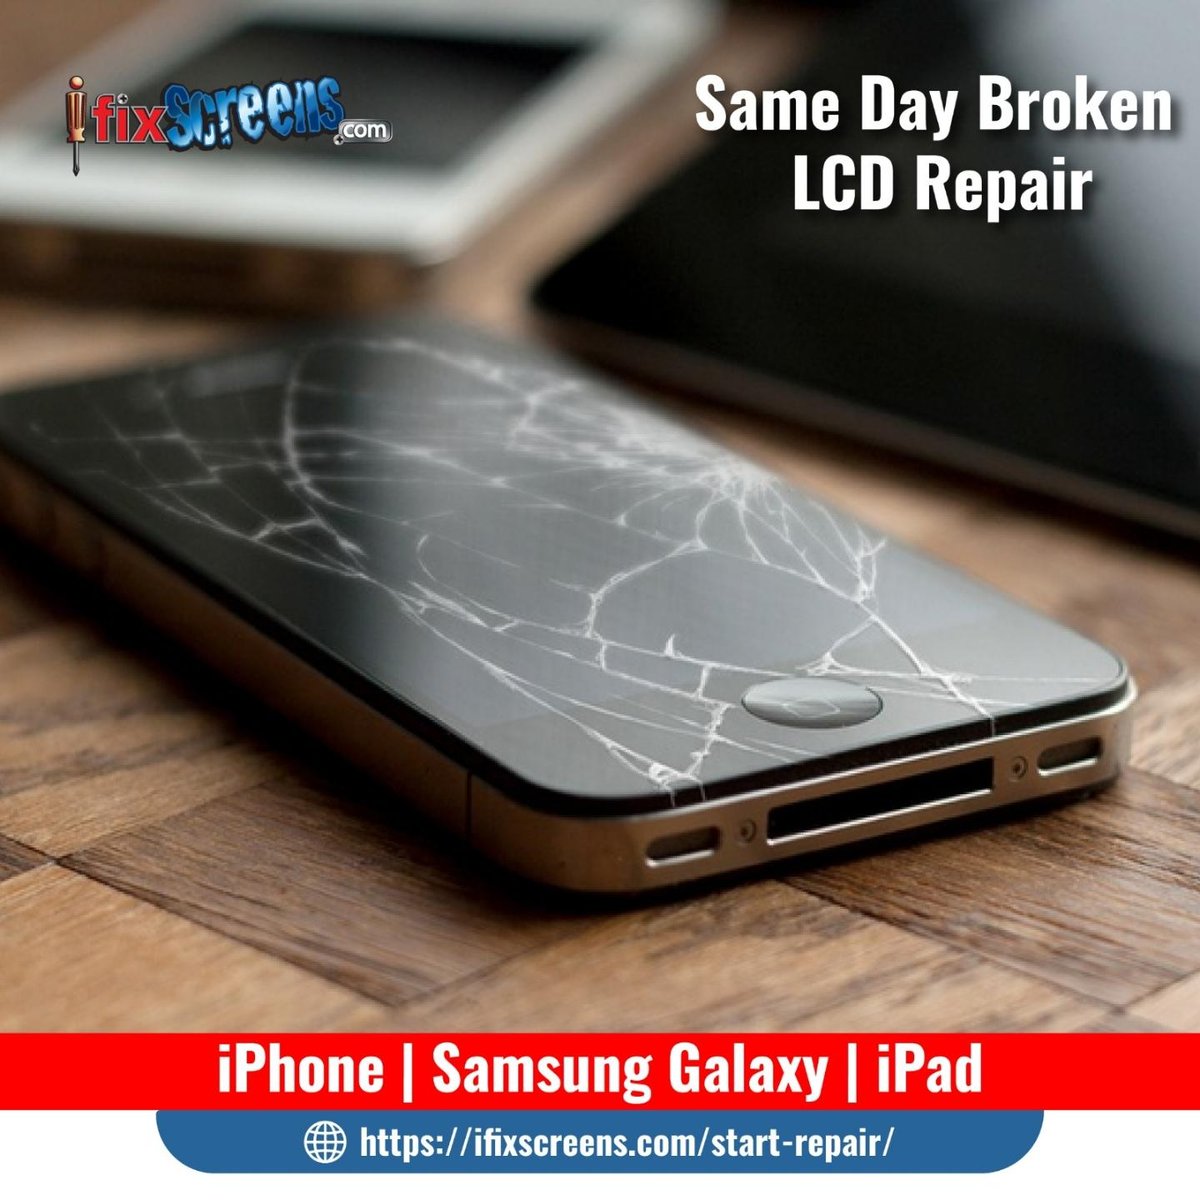 Have you got a broken LCD screen on your iPhone, Samsung Galaxy, or iPad? Don't stress! Our expert technicians can fix it on the same day. Get your device up and running again in no time!
Contact us today for a free quote.
ifixscreens.com/smartphone-rep…
 #LCDrepair #SameDayService